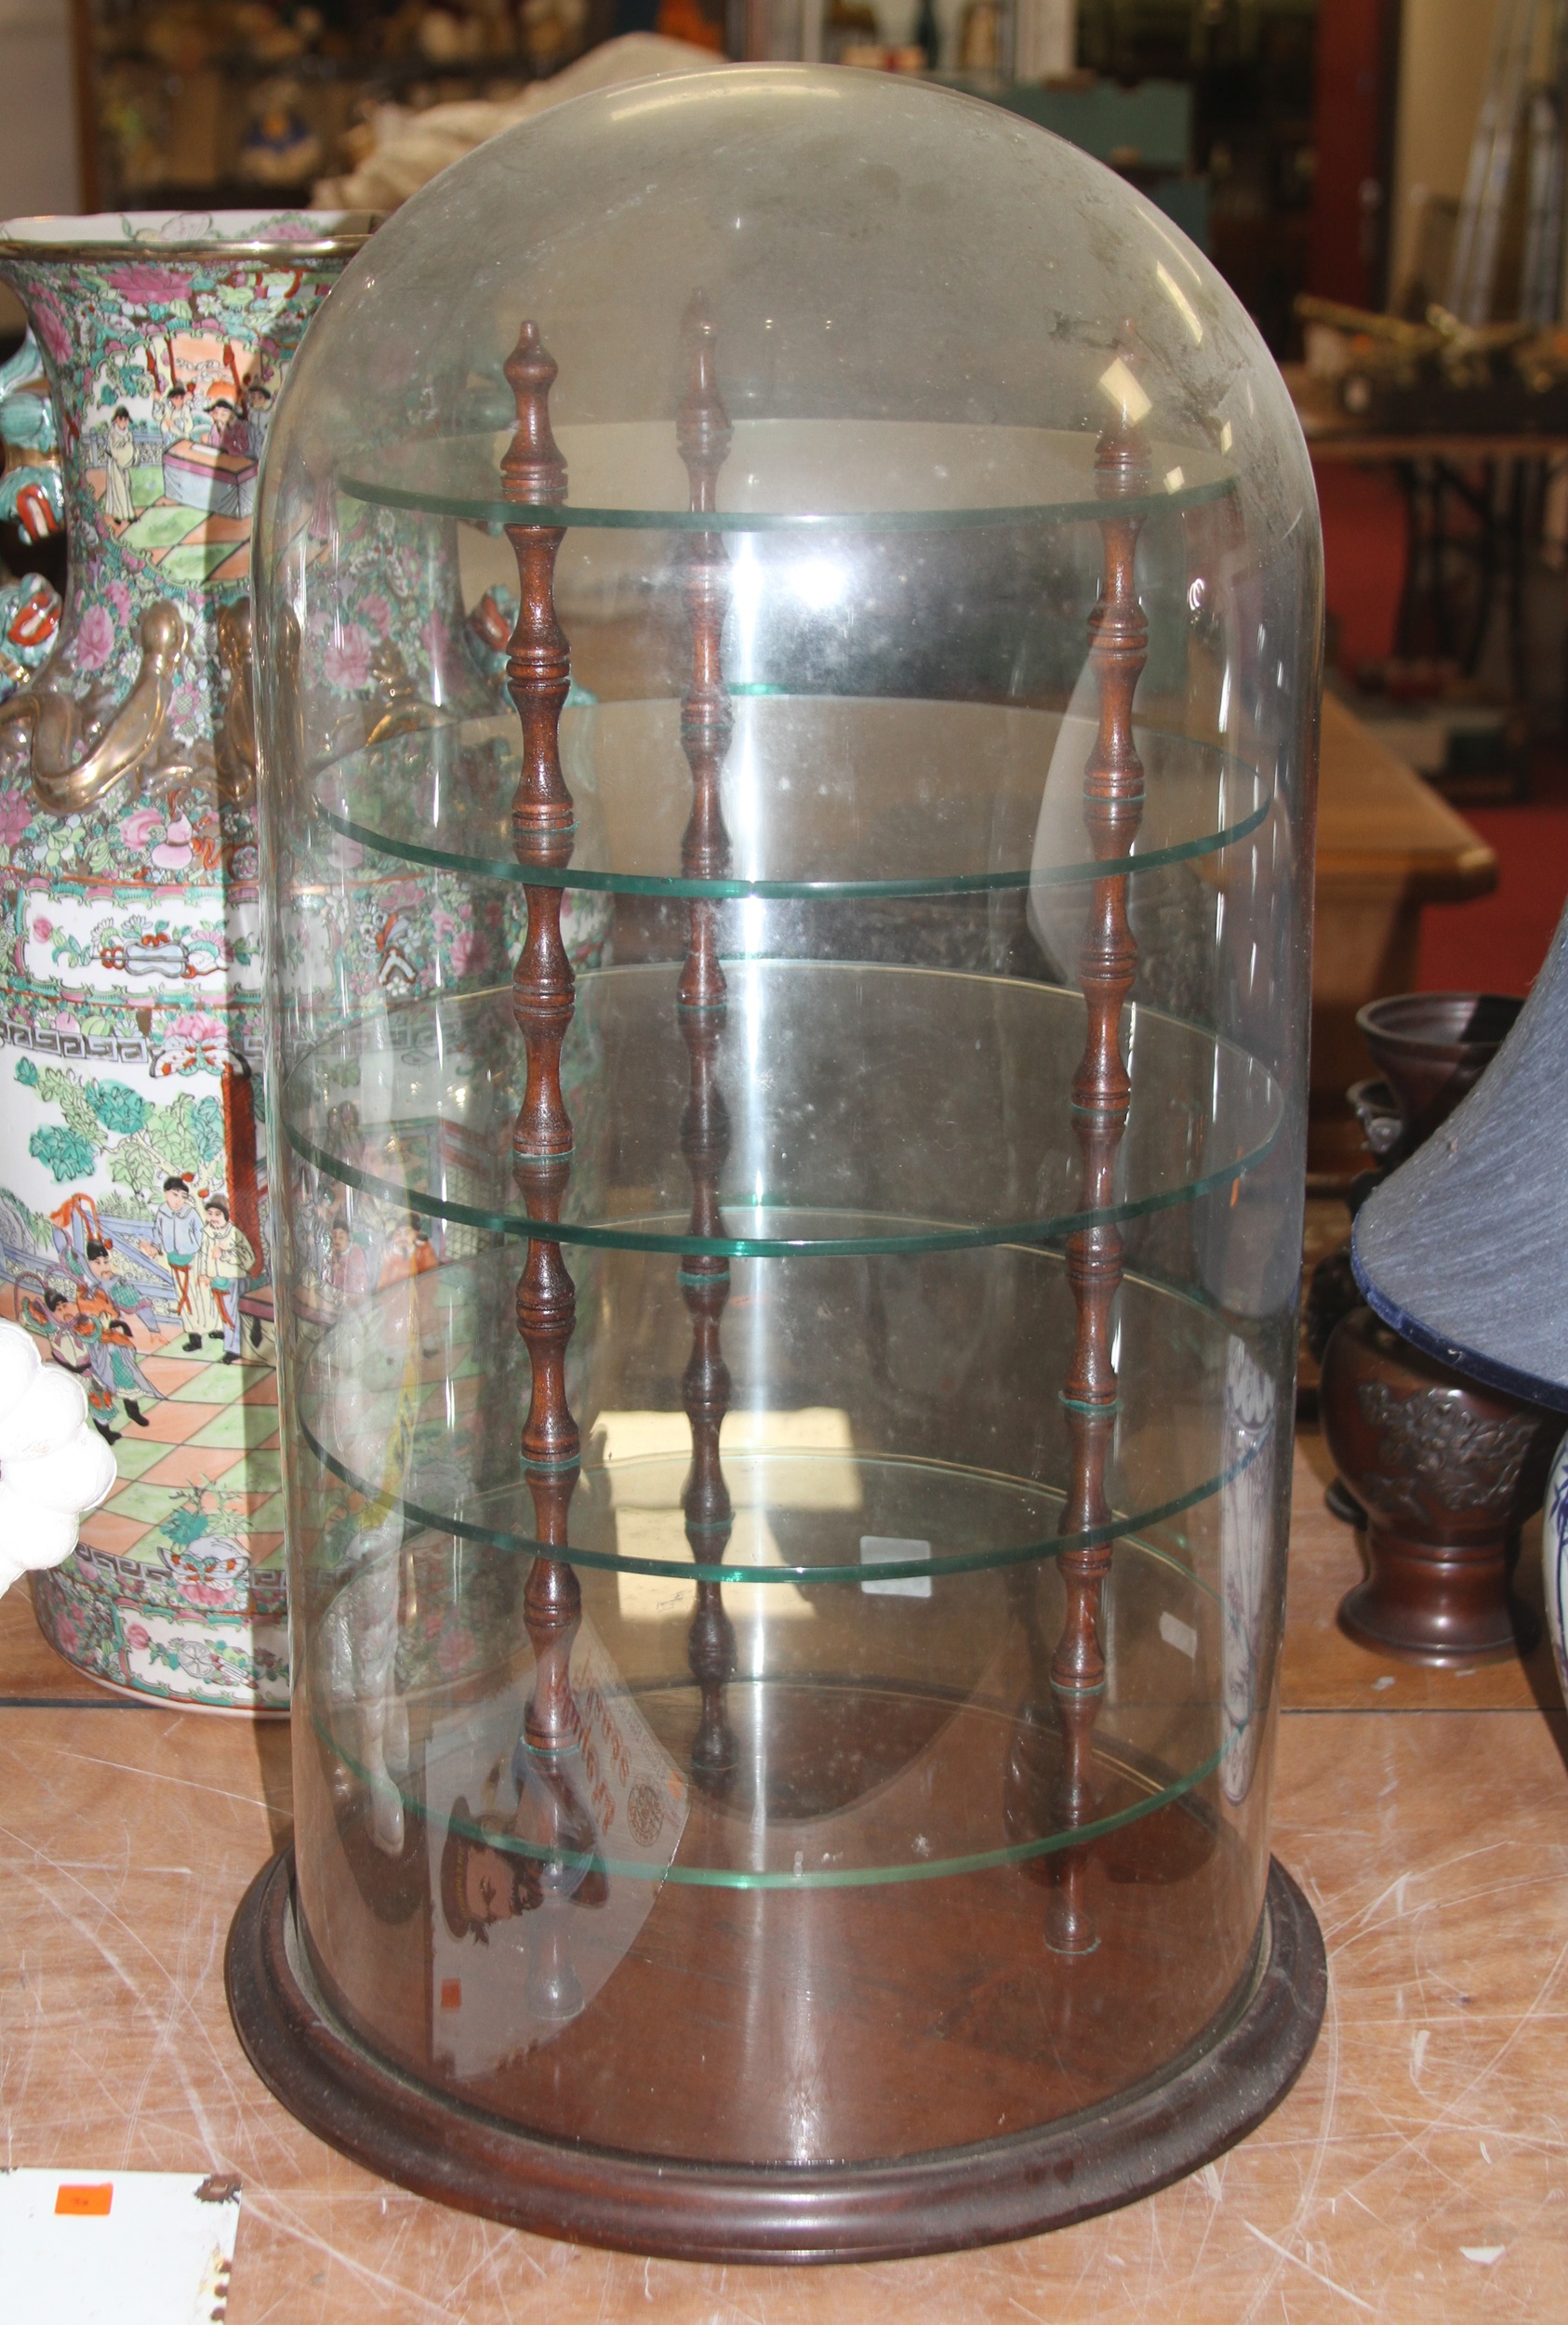 At Auction: GLASS DOME THIMBLE DISPLAY HOLDER VINTAGE ANTIQUE